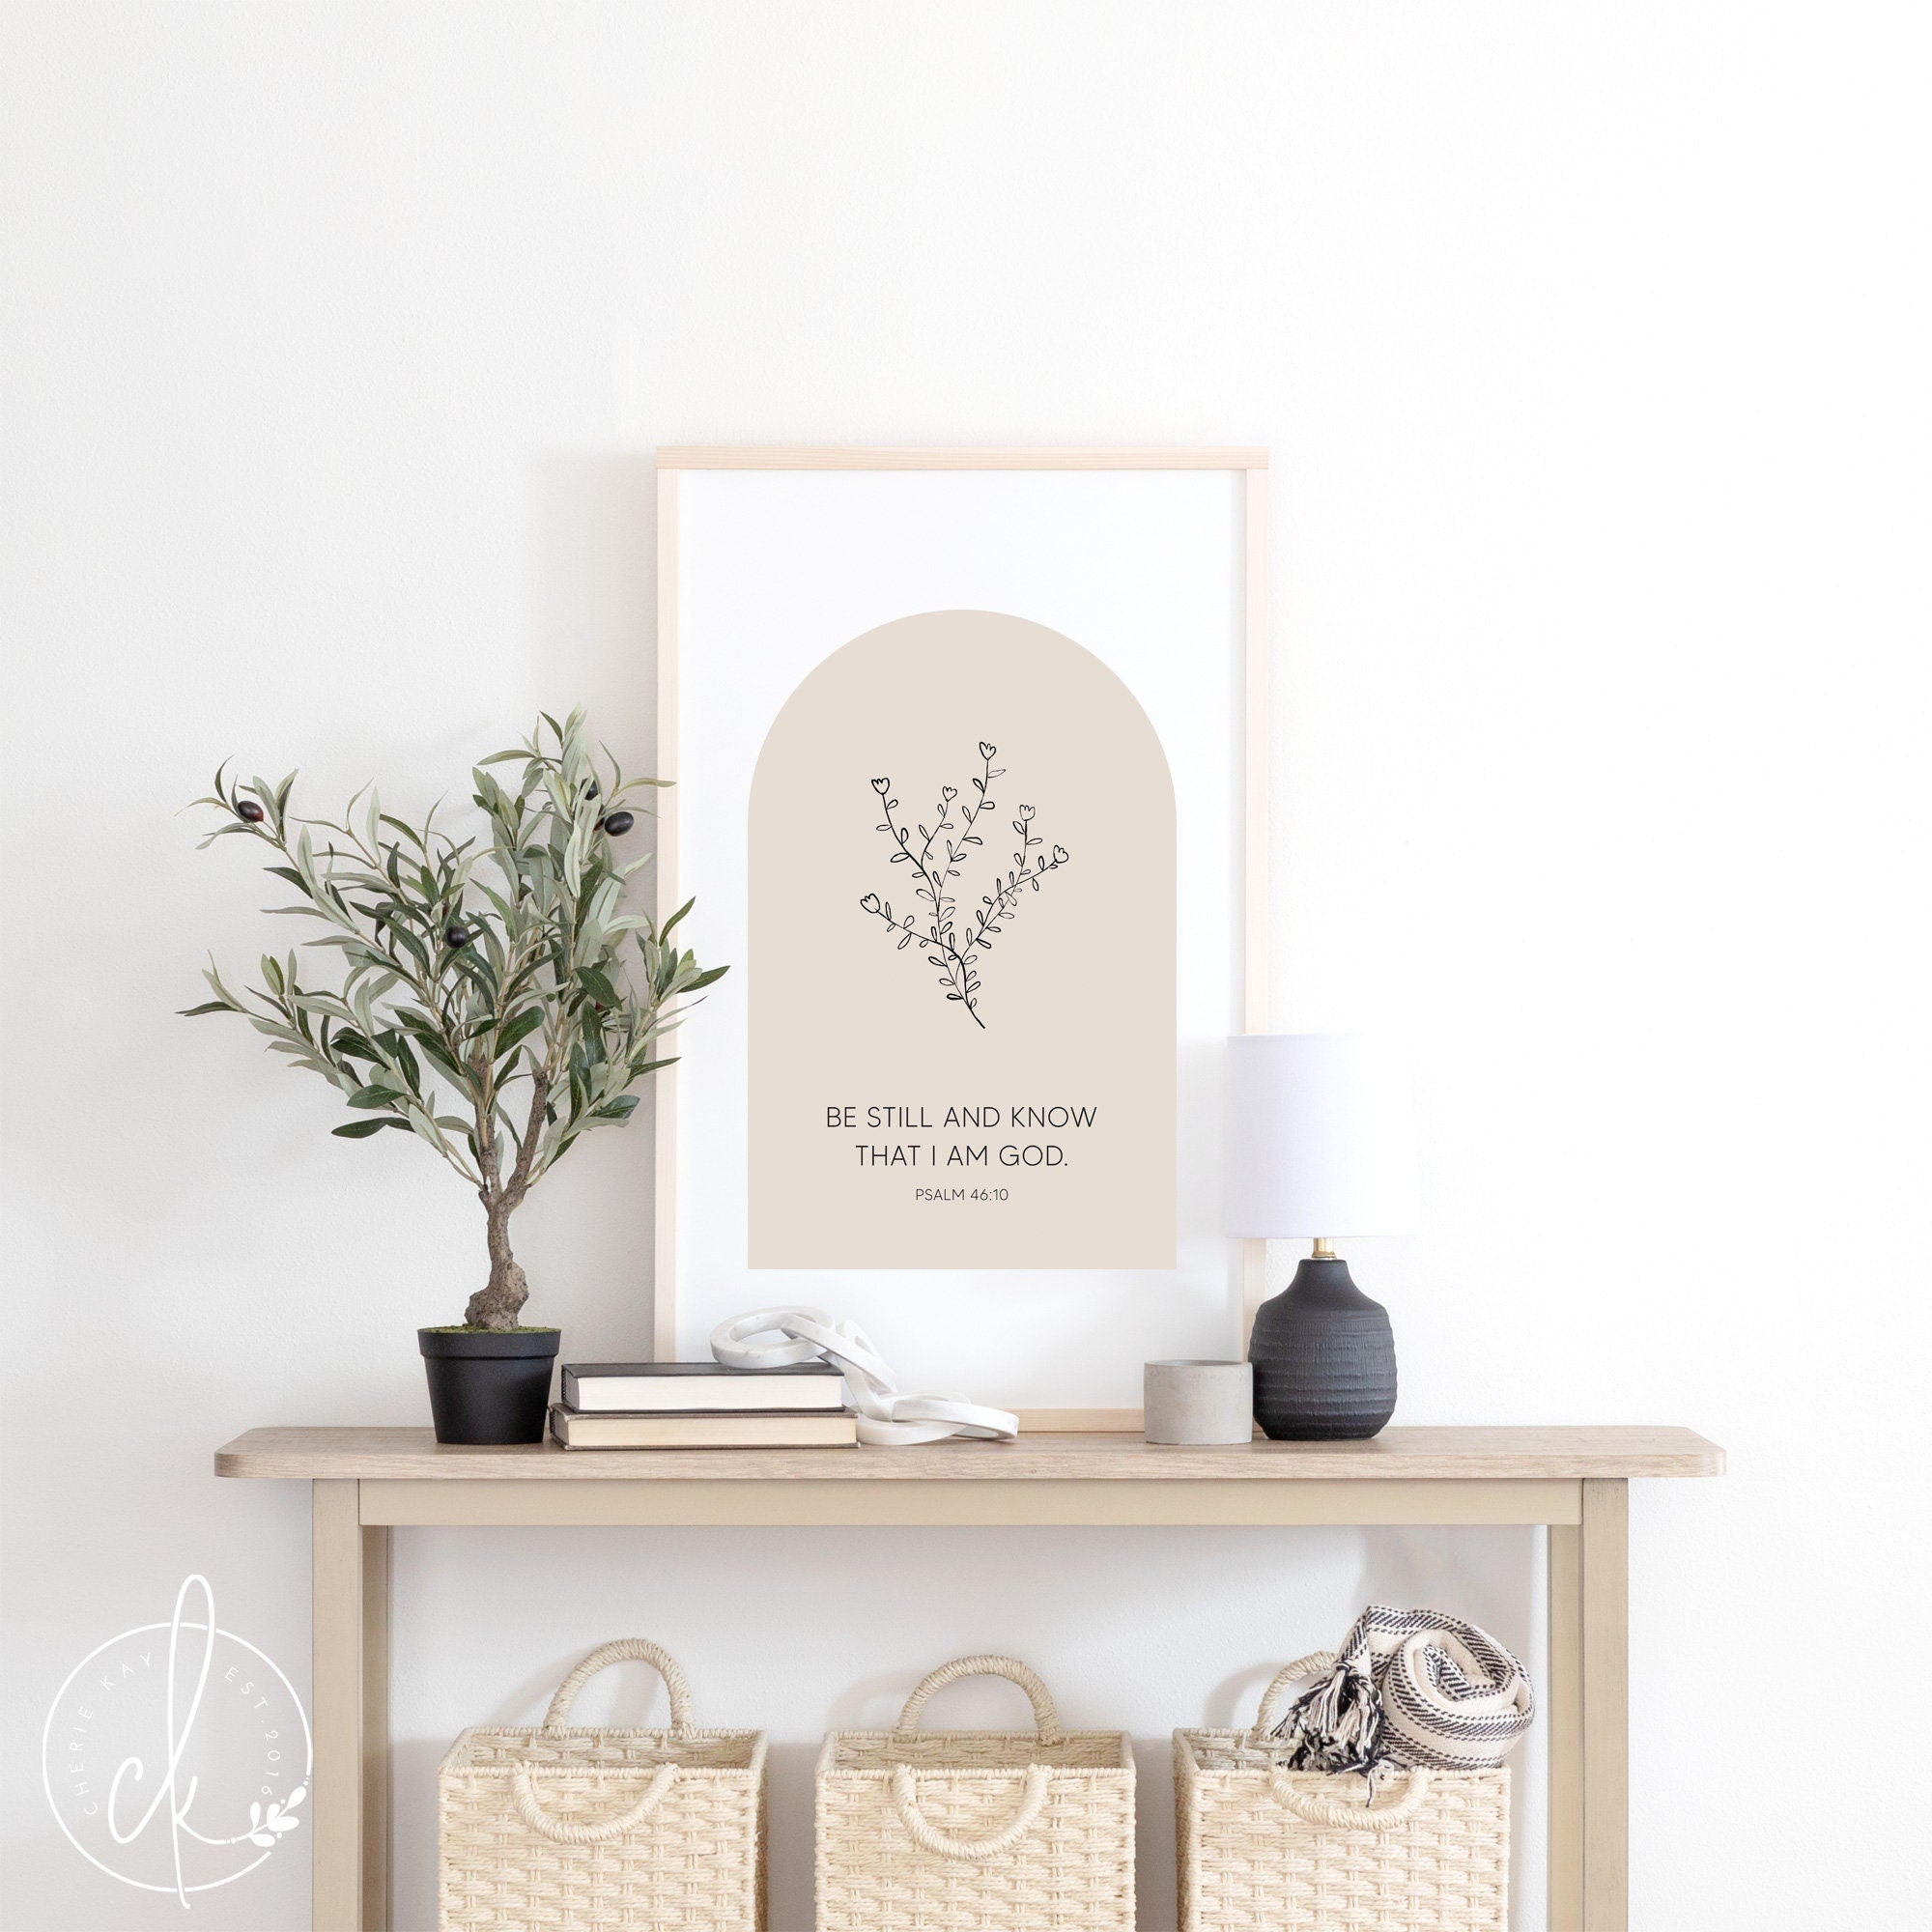 Be Still And Know That I Am God | Wooden Sign | Christian Wall Art | Scripture Wall Decor | Inspirational Art | Psalm 46:10